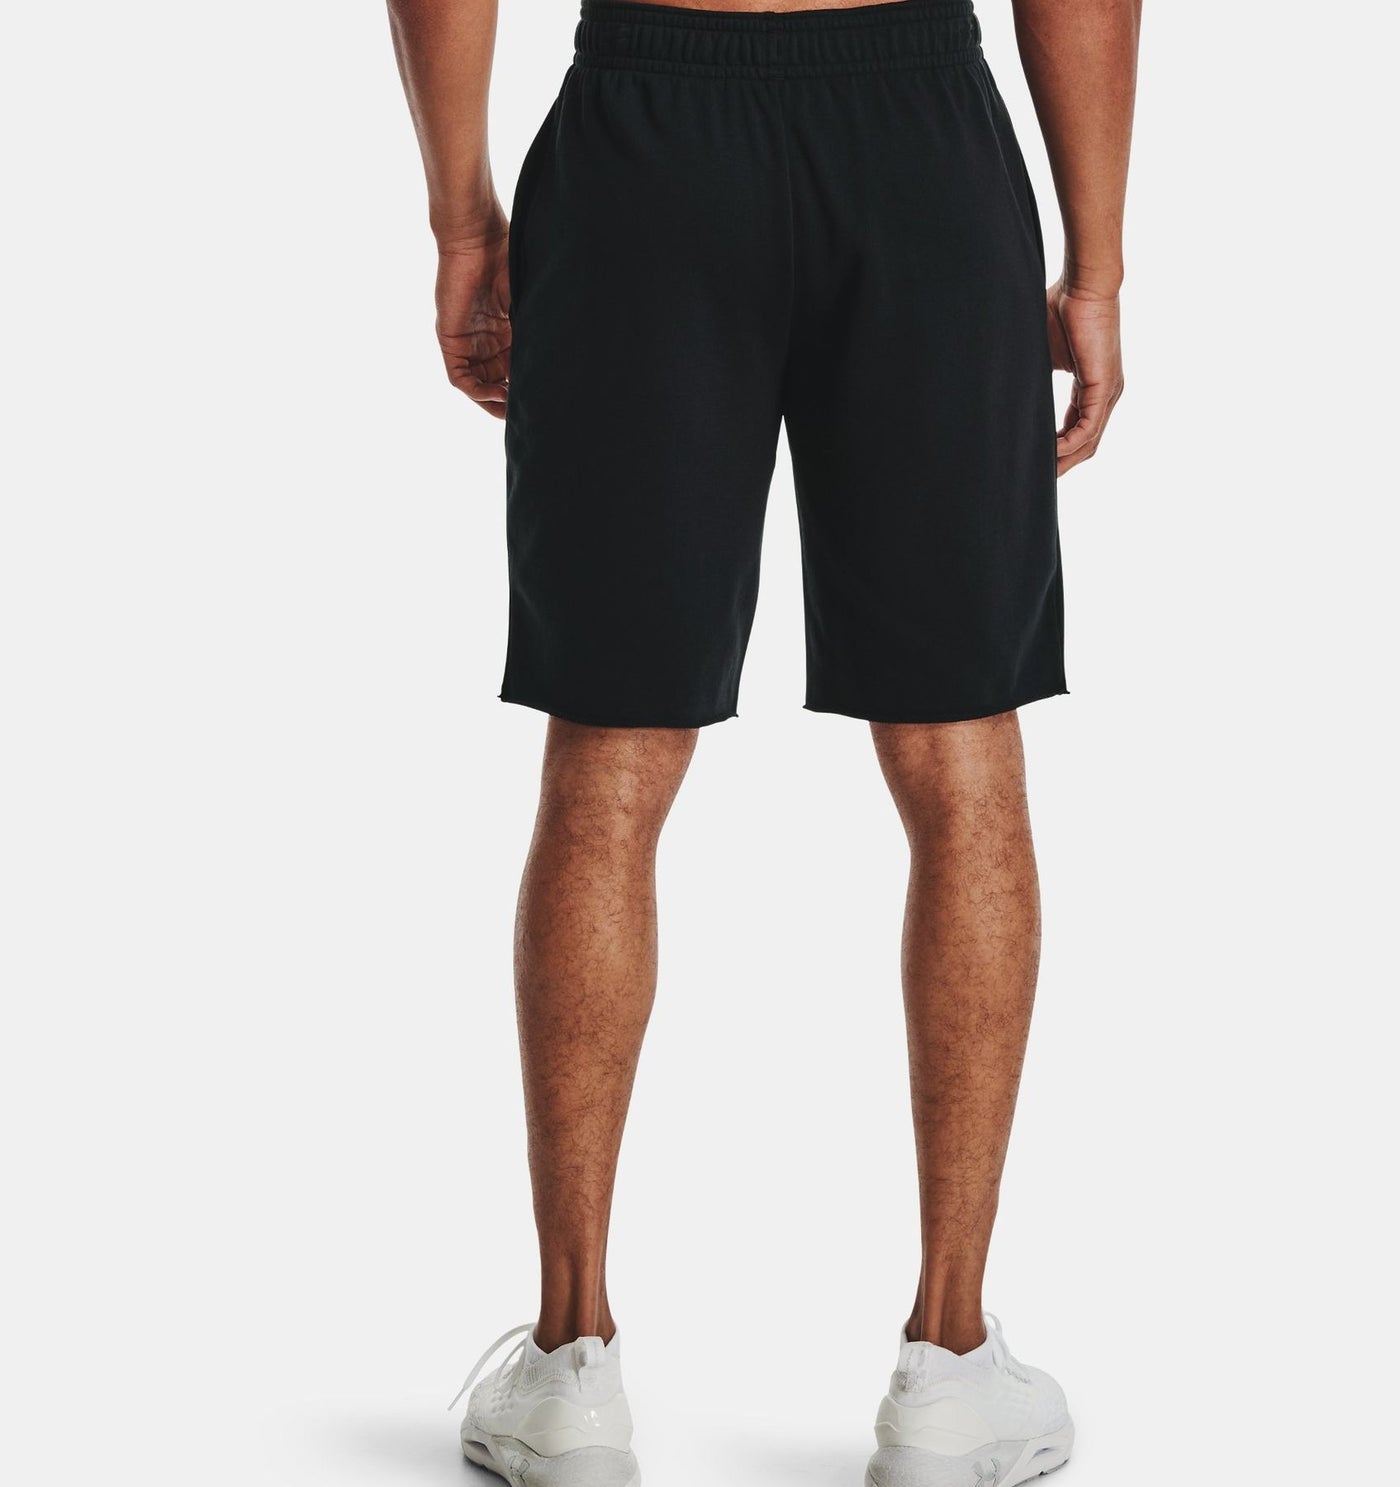 1361631-001 - Shorts - Under Armour